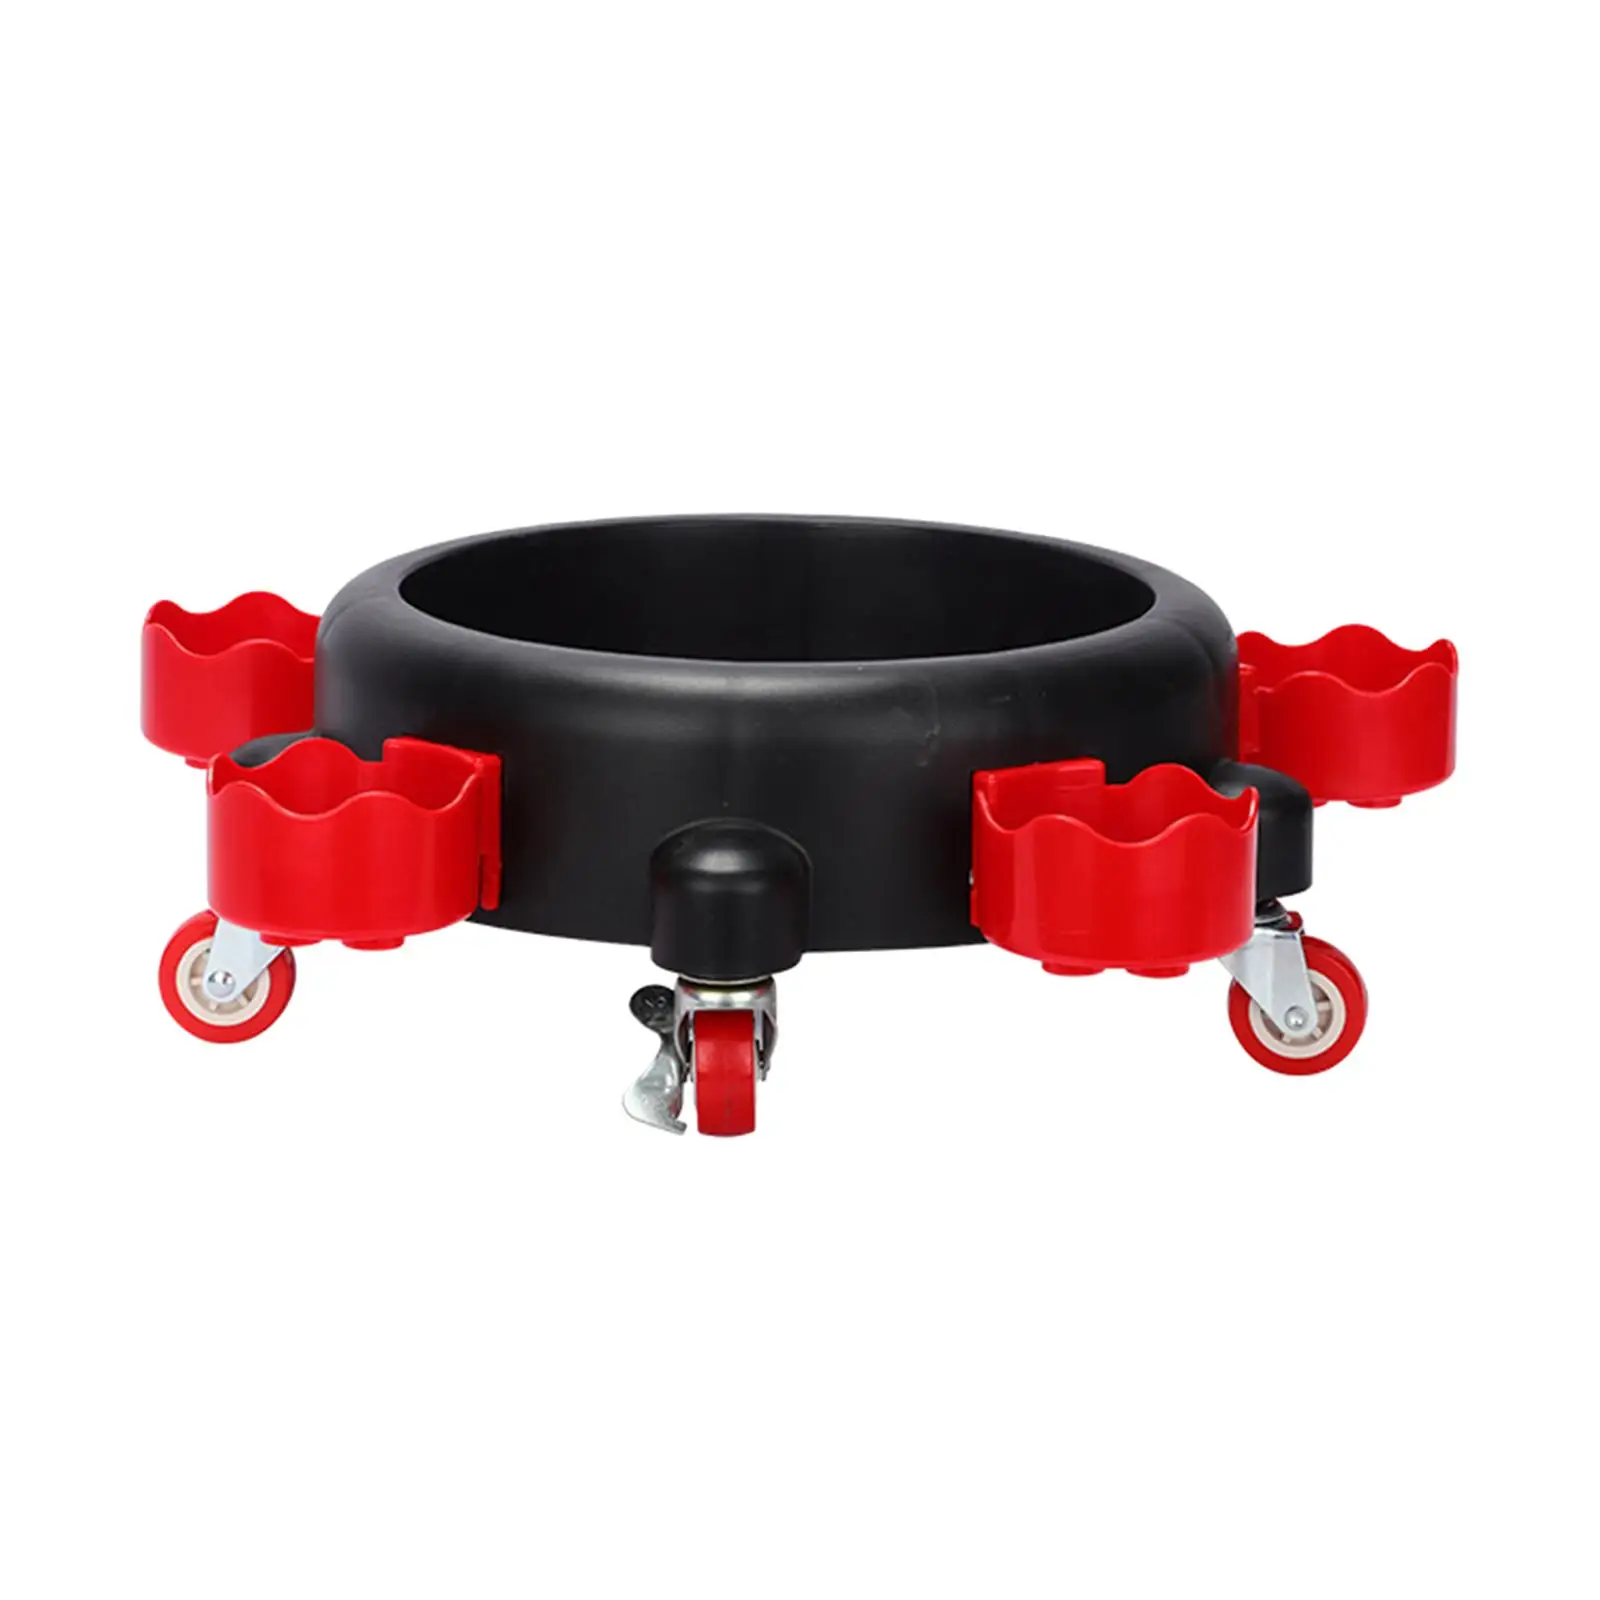 Rolling Bucket Dolly Heavy Duty Car Wash Bucket Insert for Painting Assistance Car Wash Wash Detailing Caddy Car Beauty premium